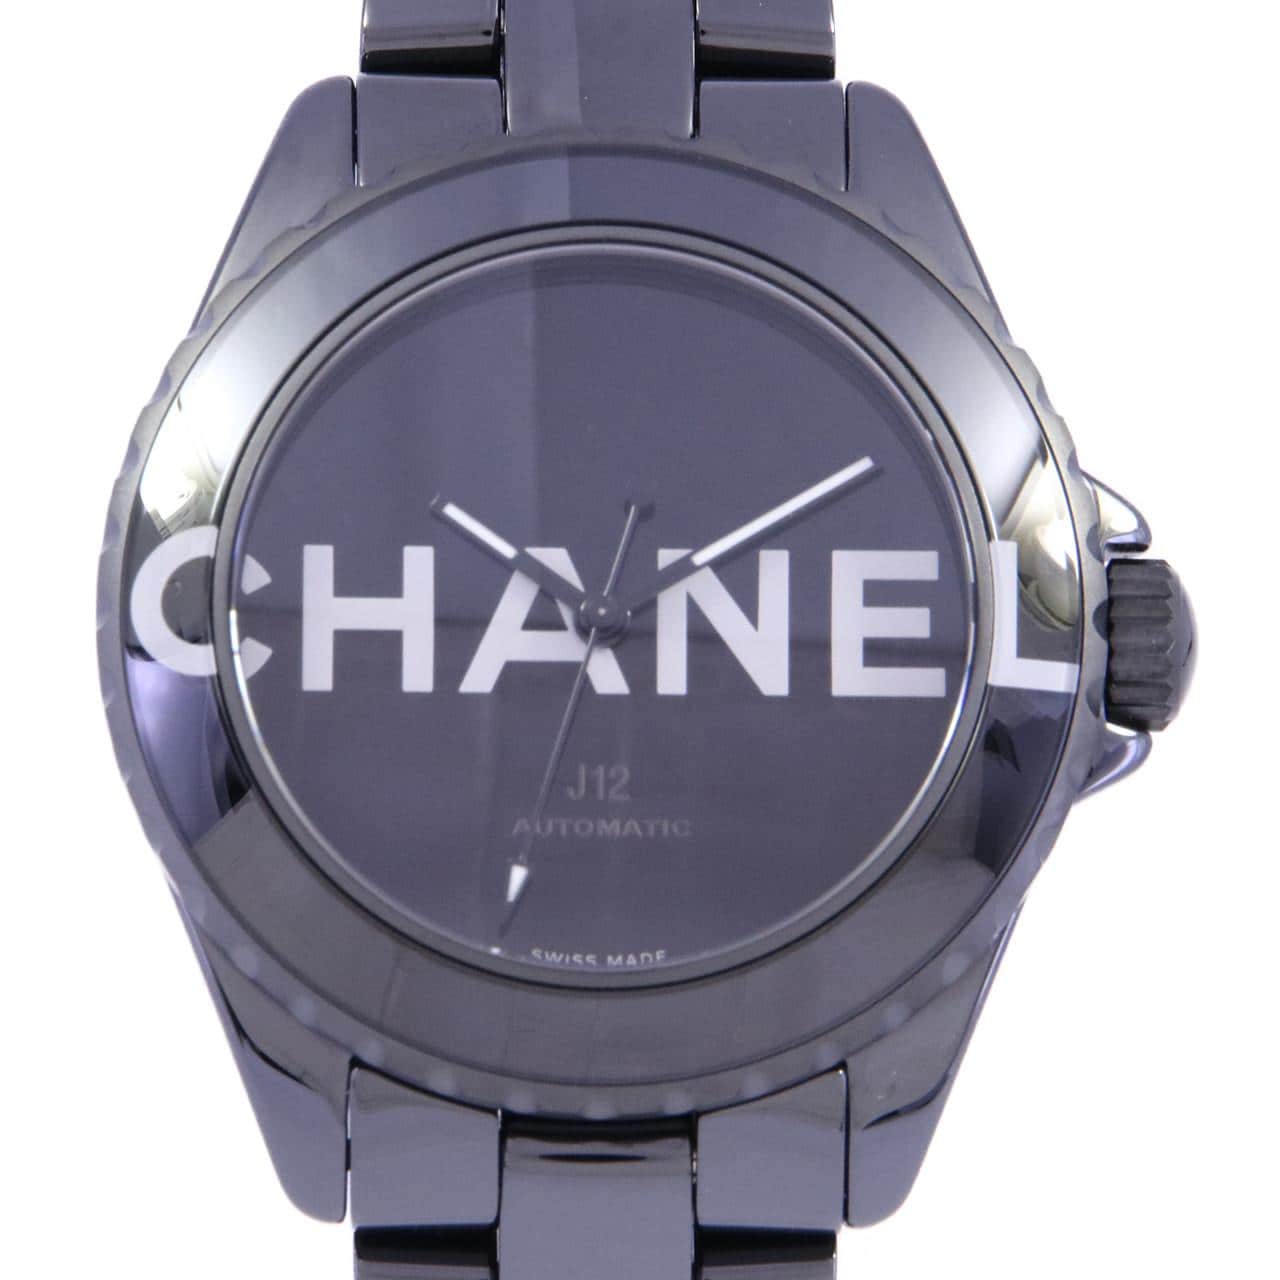 [BRAND NEW] CHANEL J12 Wanted Du CHANEL 38mm Ceramic LIMITED H7418 Ceramic Automatic